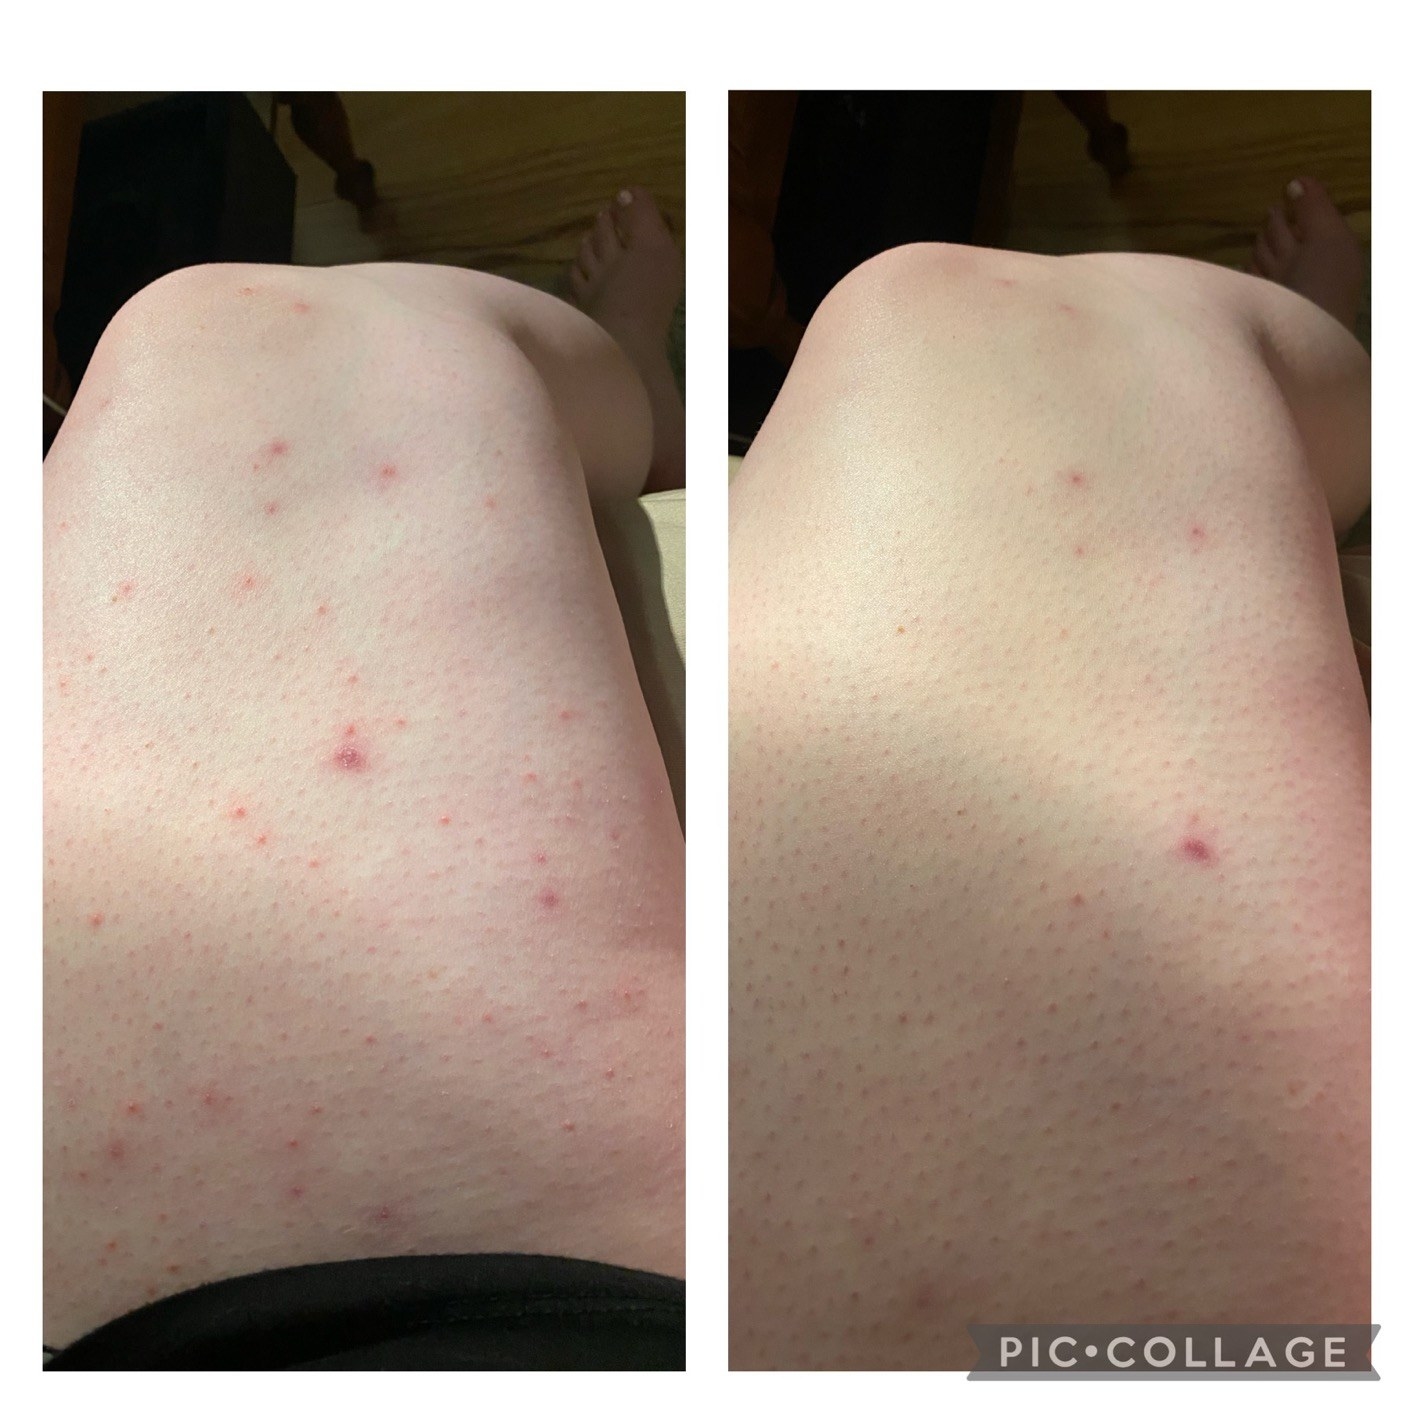 reviewer before and after images showing a thigh going from lots or red acne spots to significantly fewer pimples